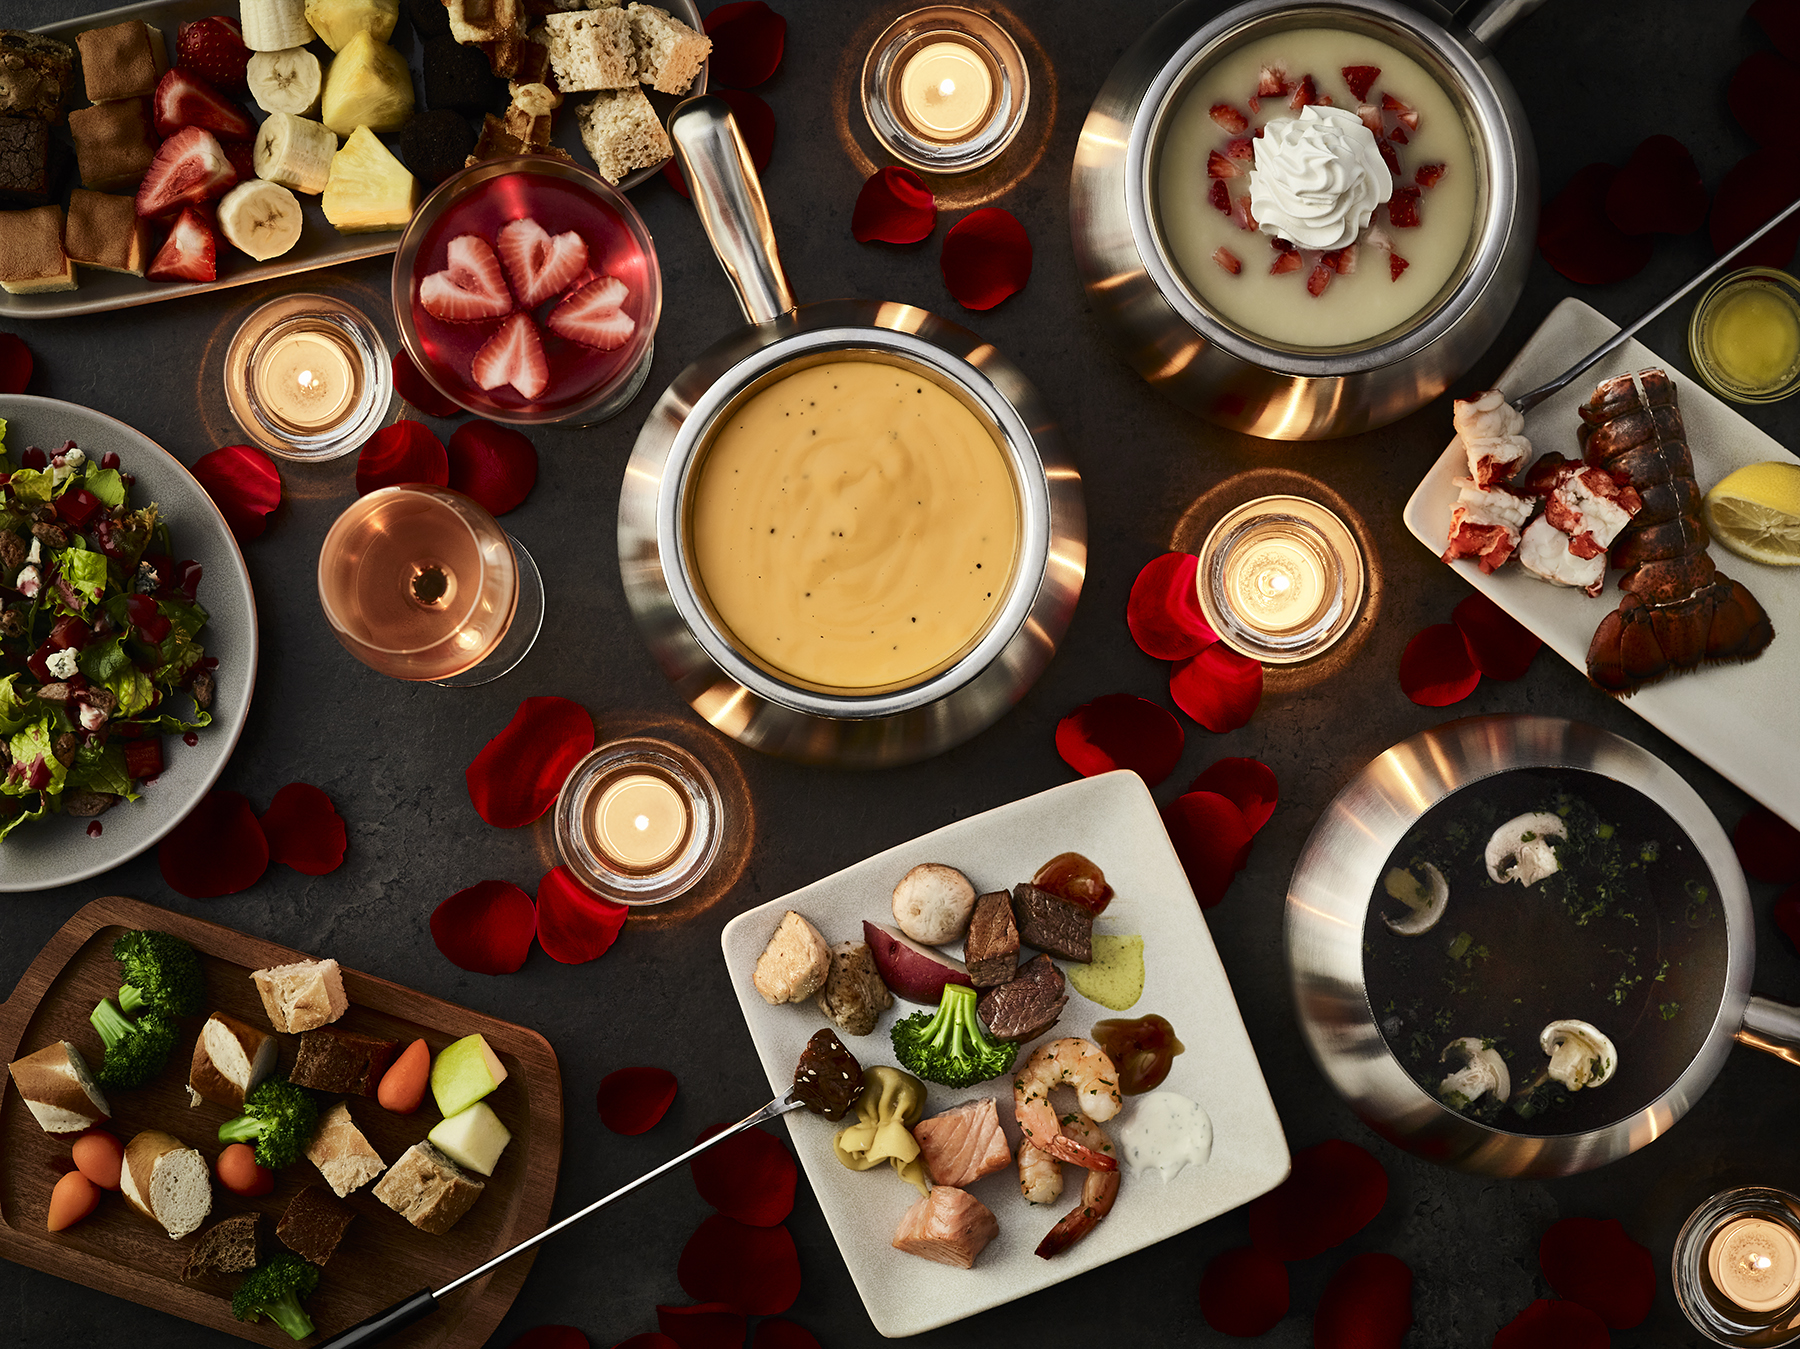 Dip into the perfect date night with Melting Pot's special Thursdate four-course menu 